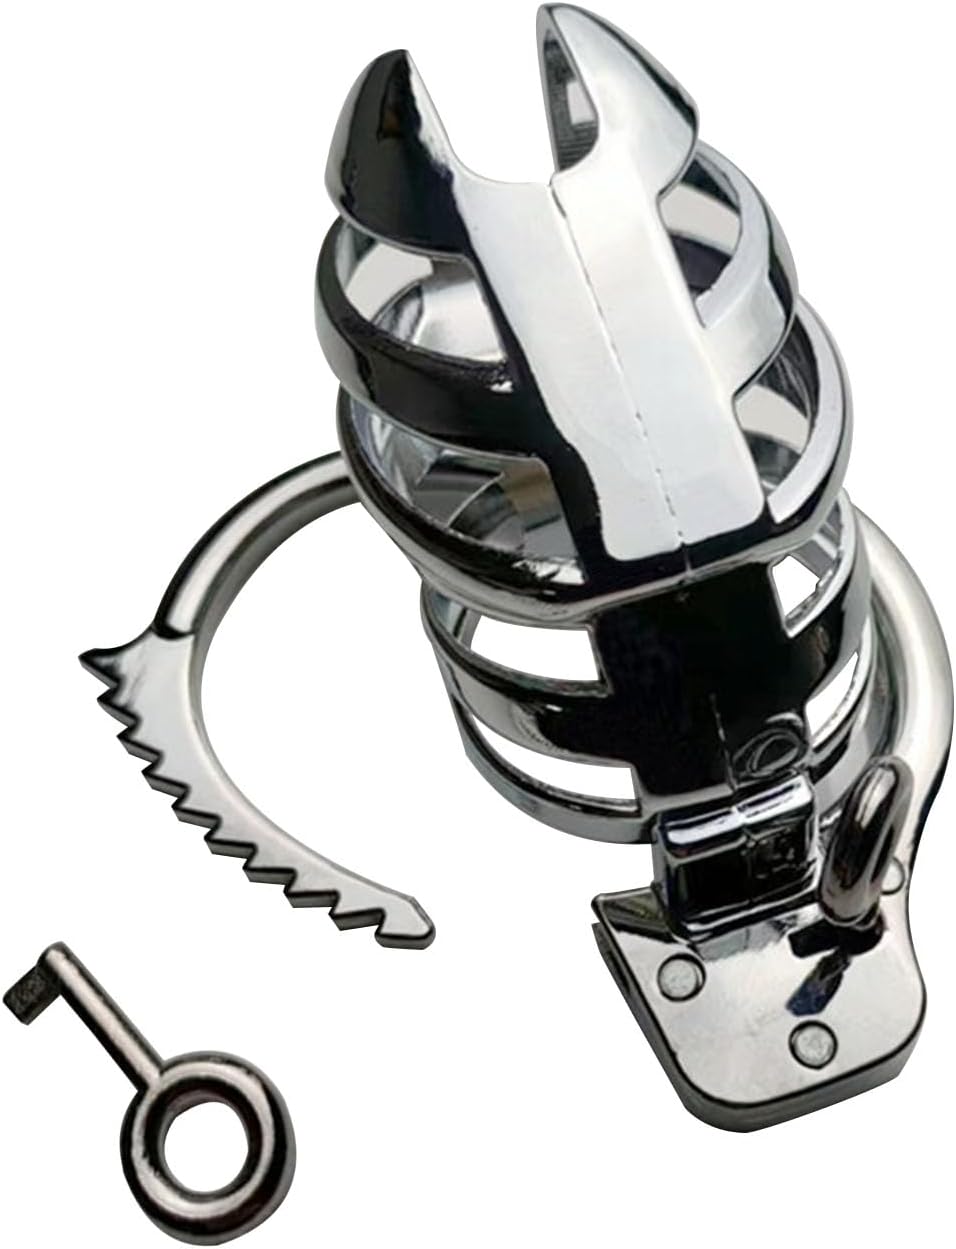 Male Cock Cage Chastity Device - AFROMIA Lightweight Chastity Cage Device  for Men with 4 Different Sizes Rings Adult Sex Toy for Male Penis Exercise  